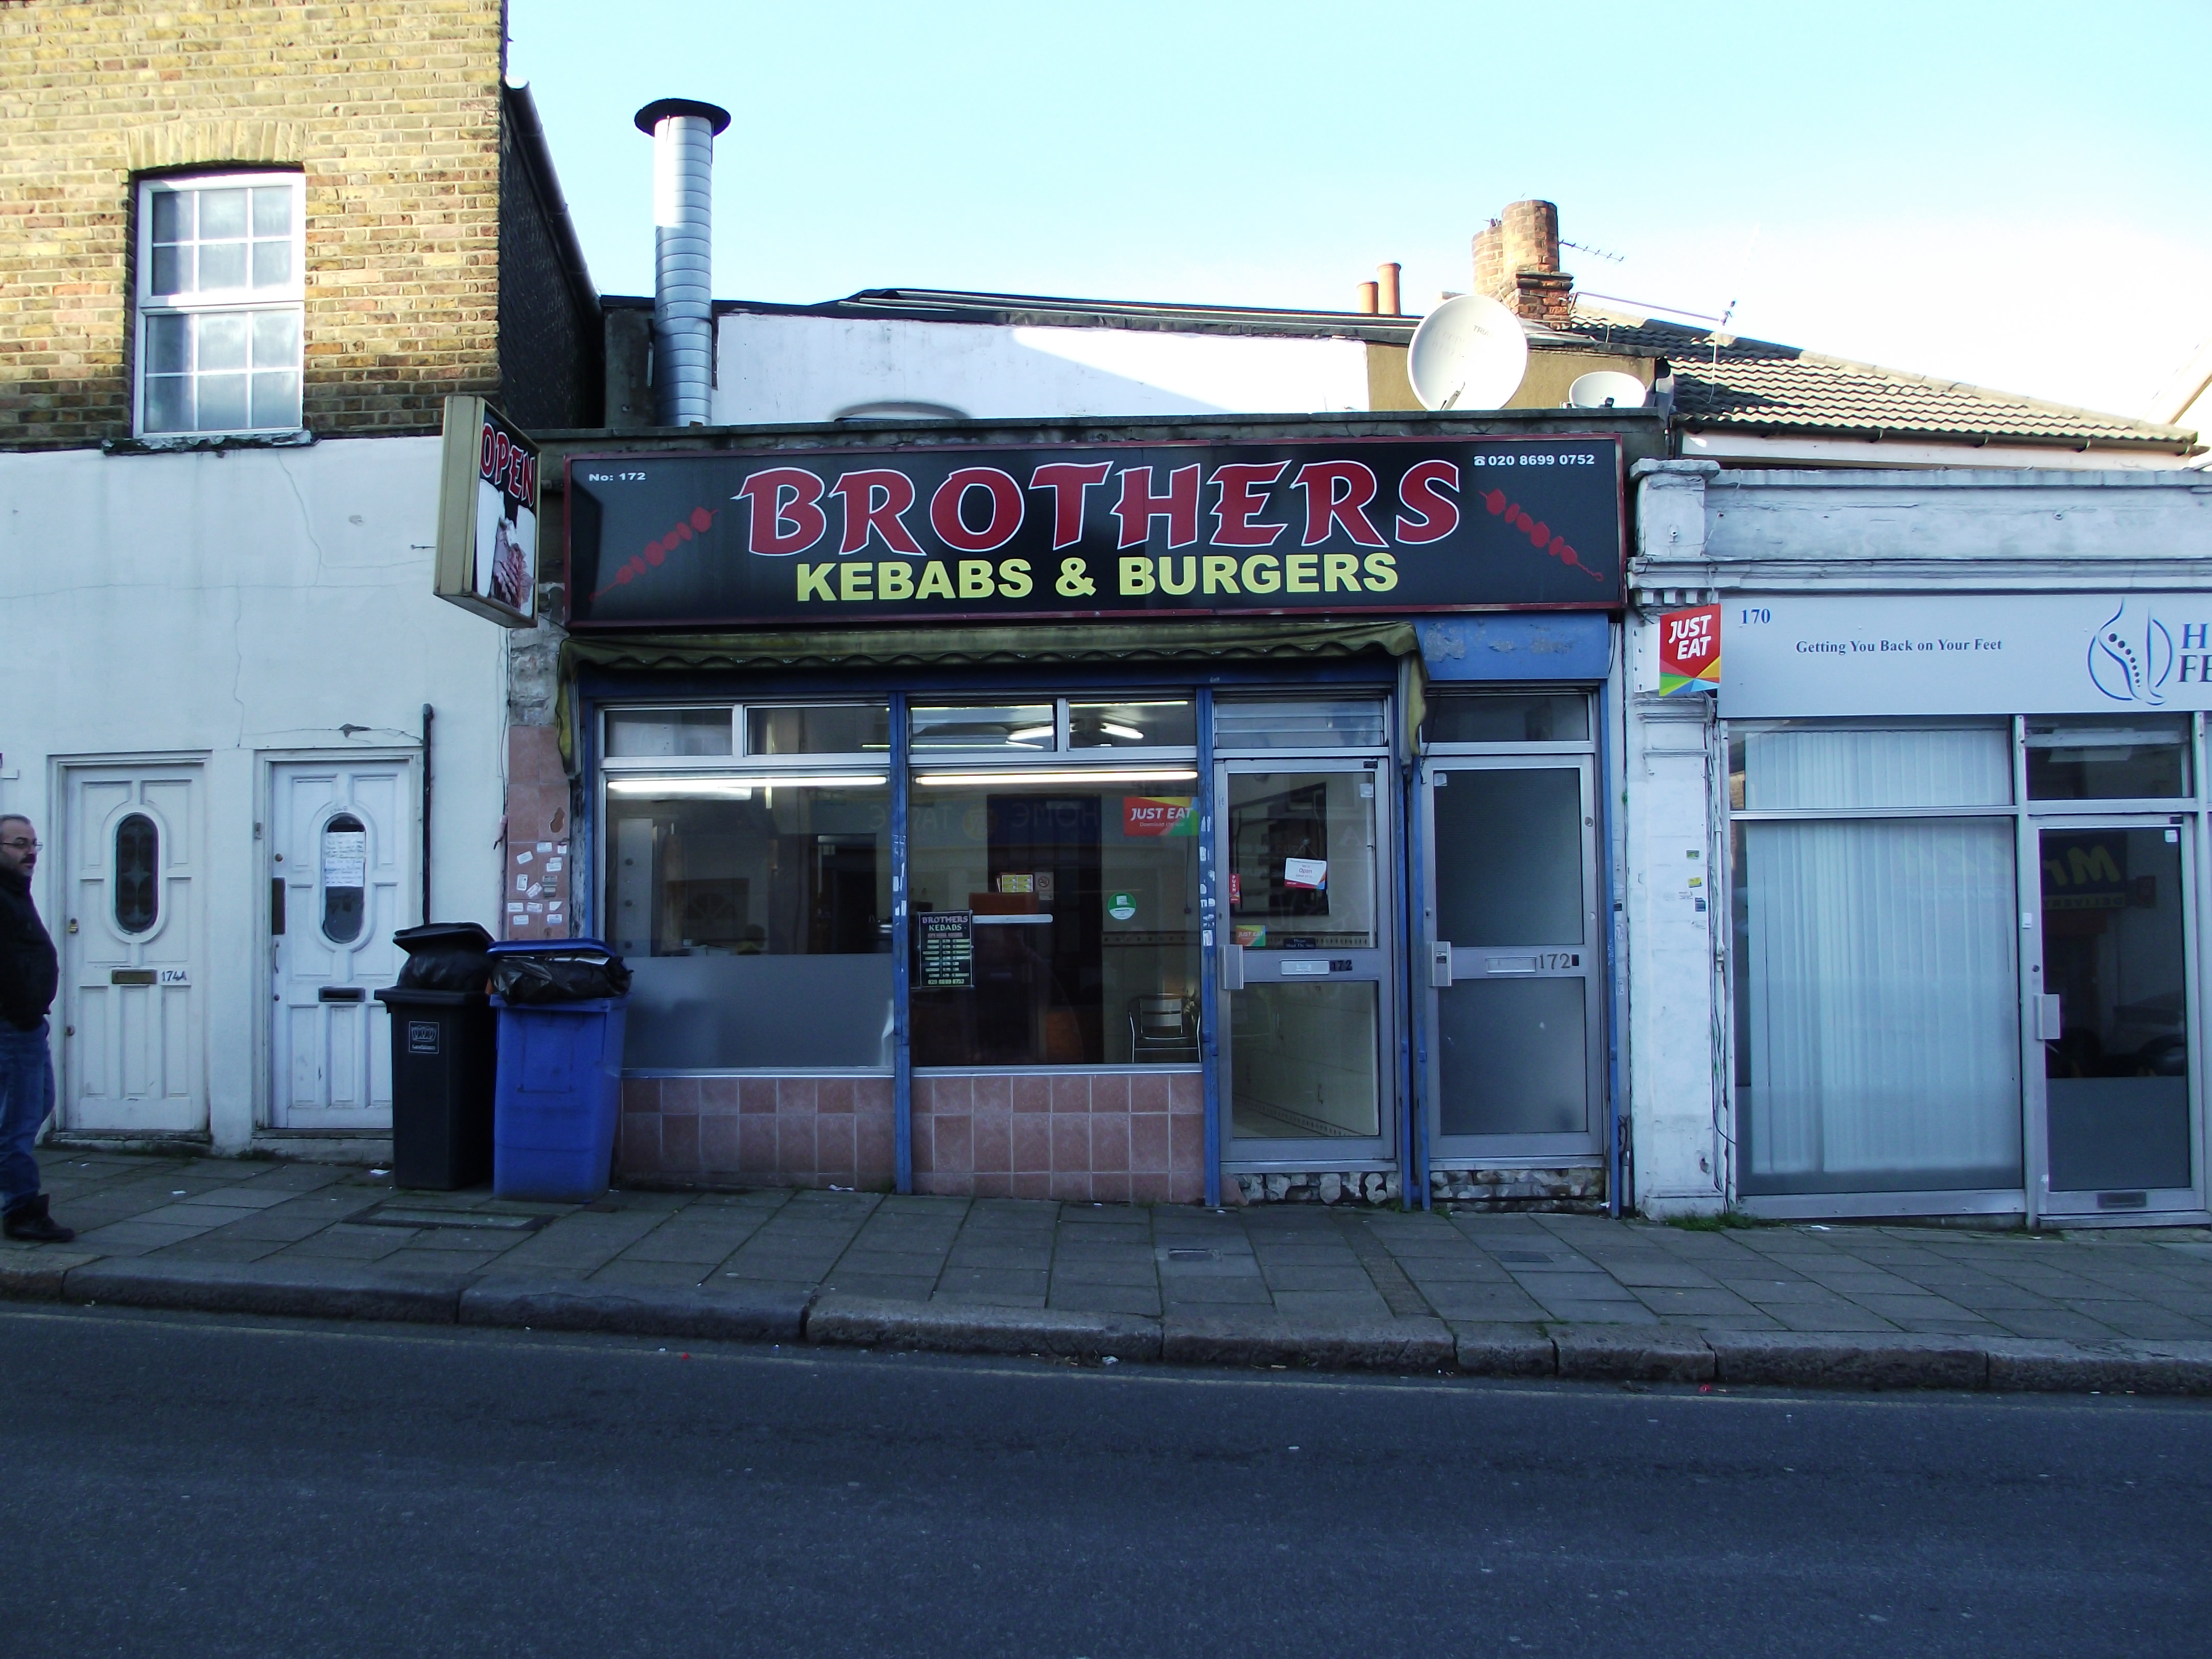 LEASE FOR SALE, Brothers Kebabs & Burgers, Sydenham, South East London. Ref. 1741